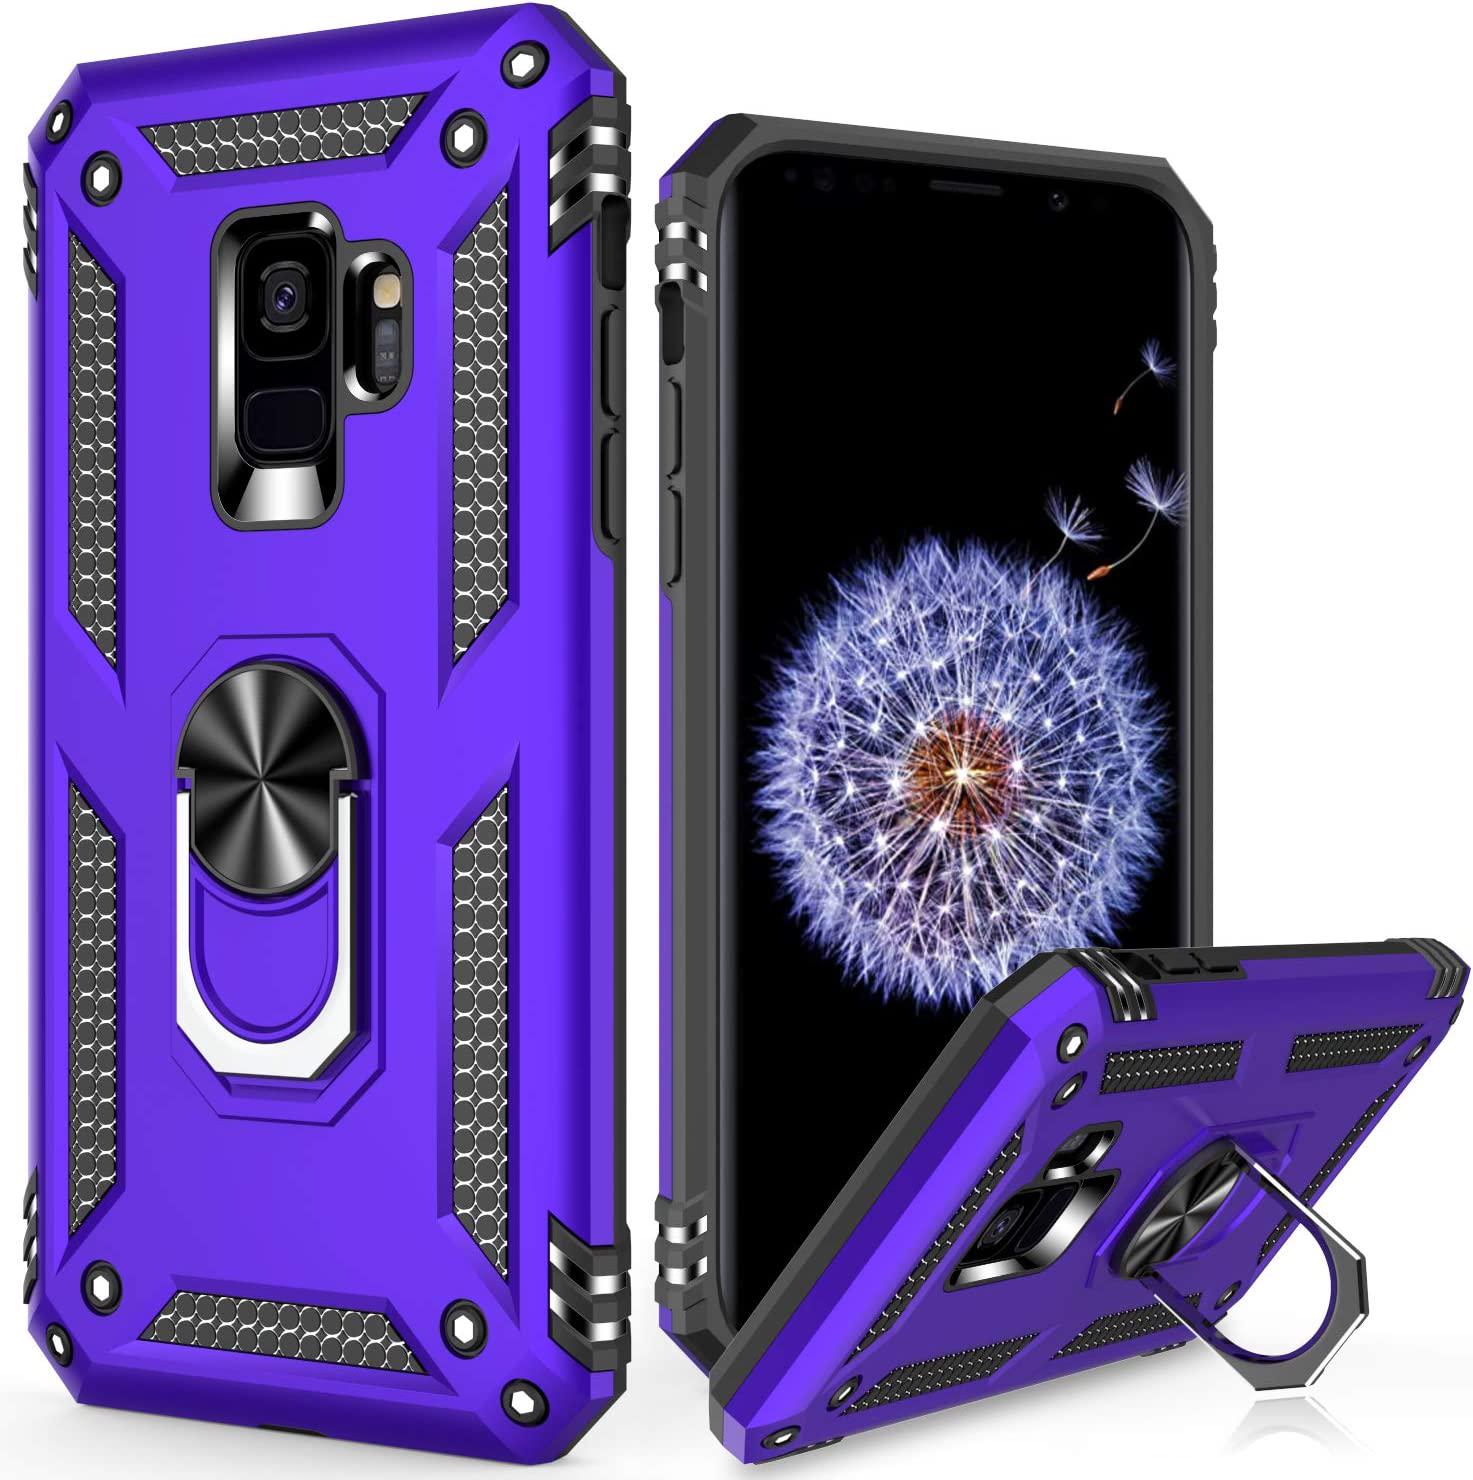 LUMARKE, LUMARKE Galaxy S9 Case,Pass 16ft Drop Test Military Grade Heavy Duty Cover with Magnetic Kickstand Compatible with Car Mount Holder,Protective Phone Case for Samsung Galaxy S9 Purple